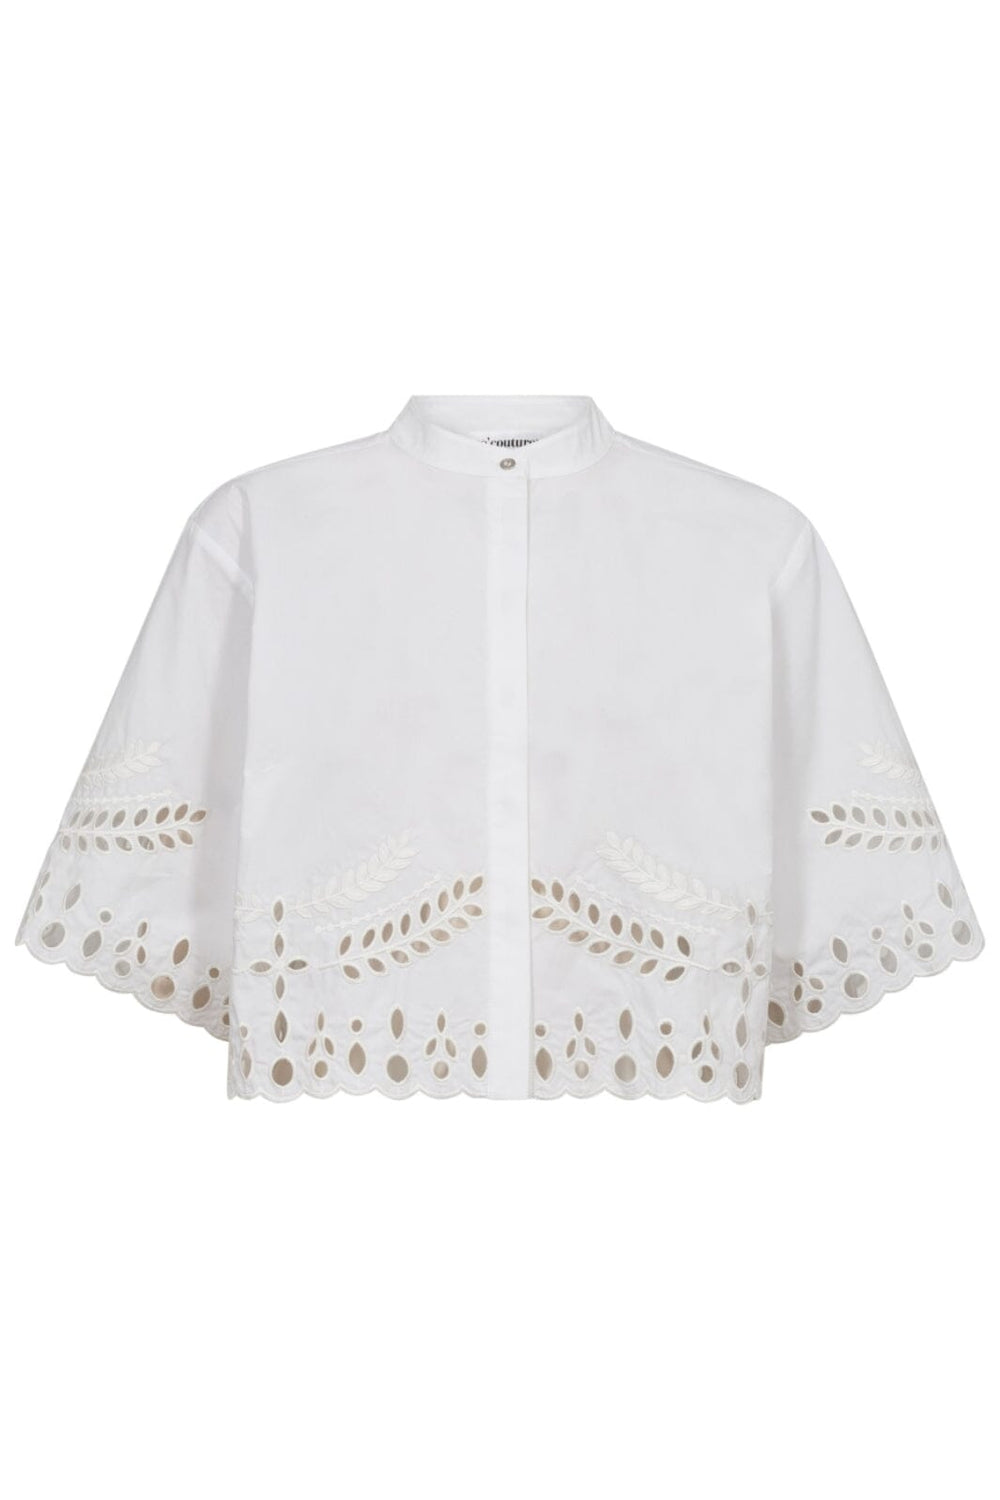 Co´couture - Primacc Embroidery Crop Shirt 35581 - 4000 White Skjorter 